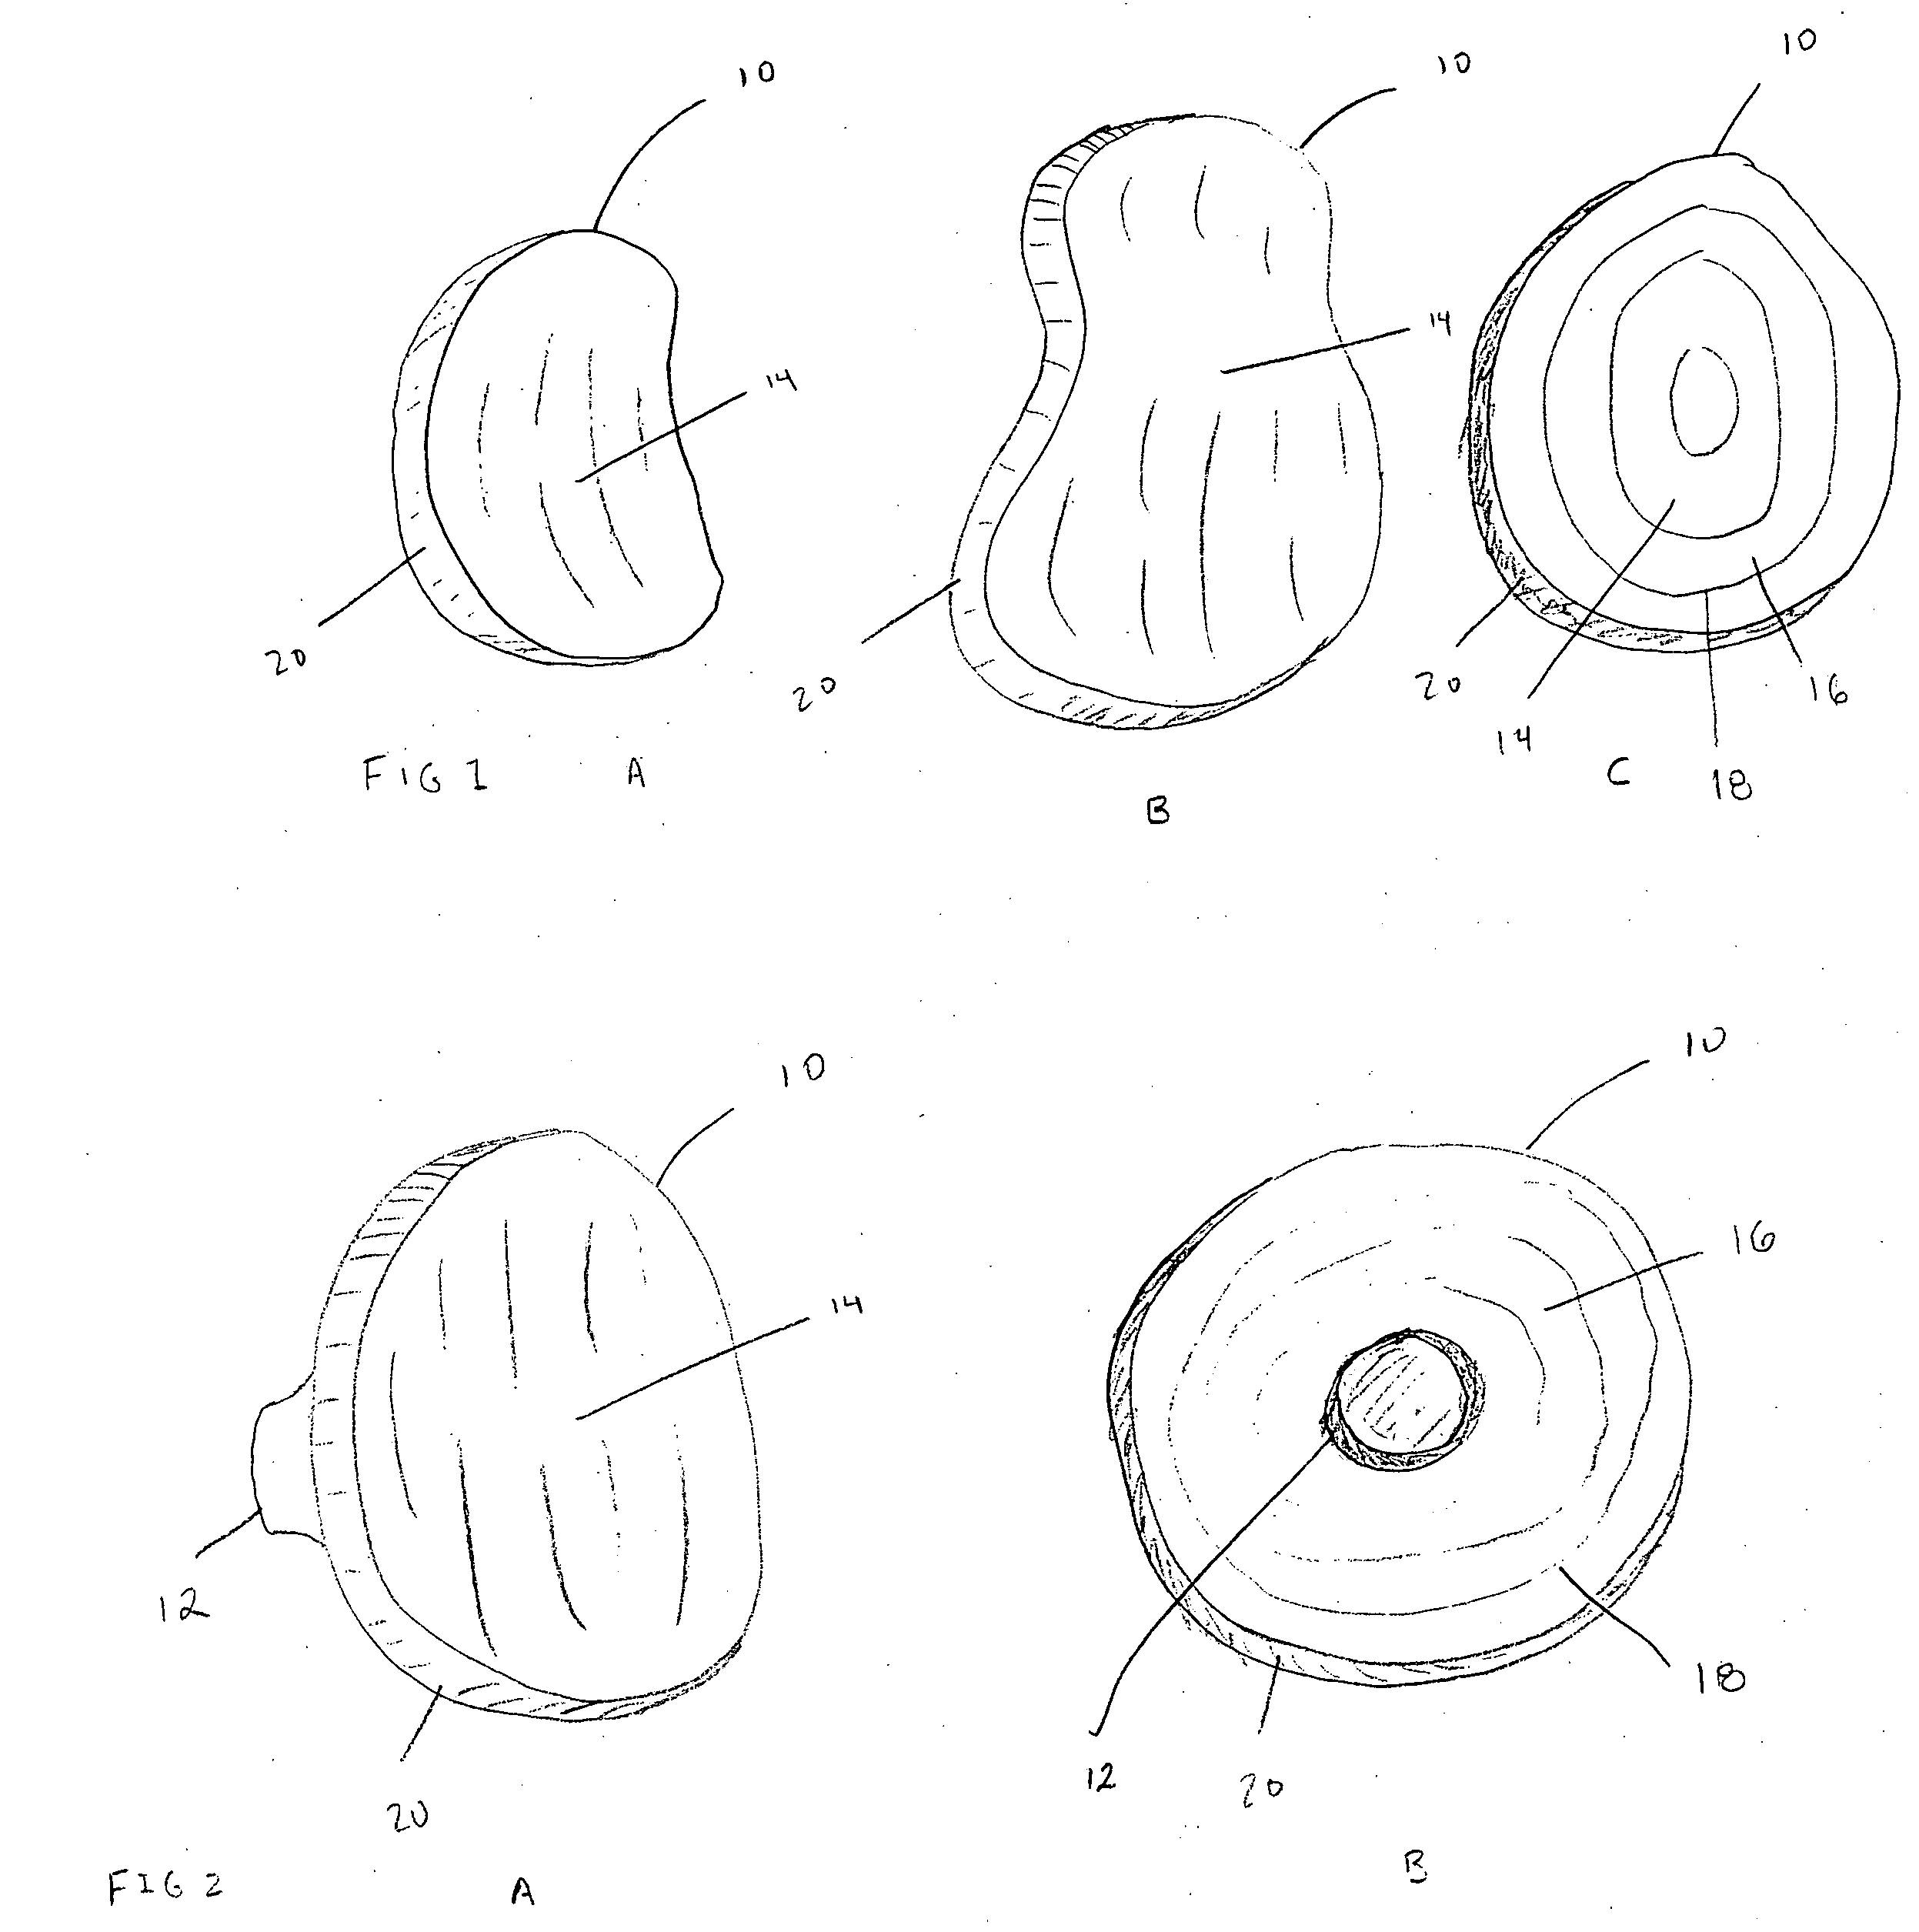 Shoulder implant for glenoid replacement and methods of use thereof